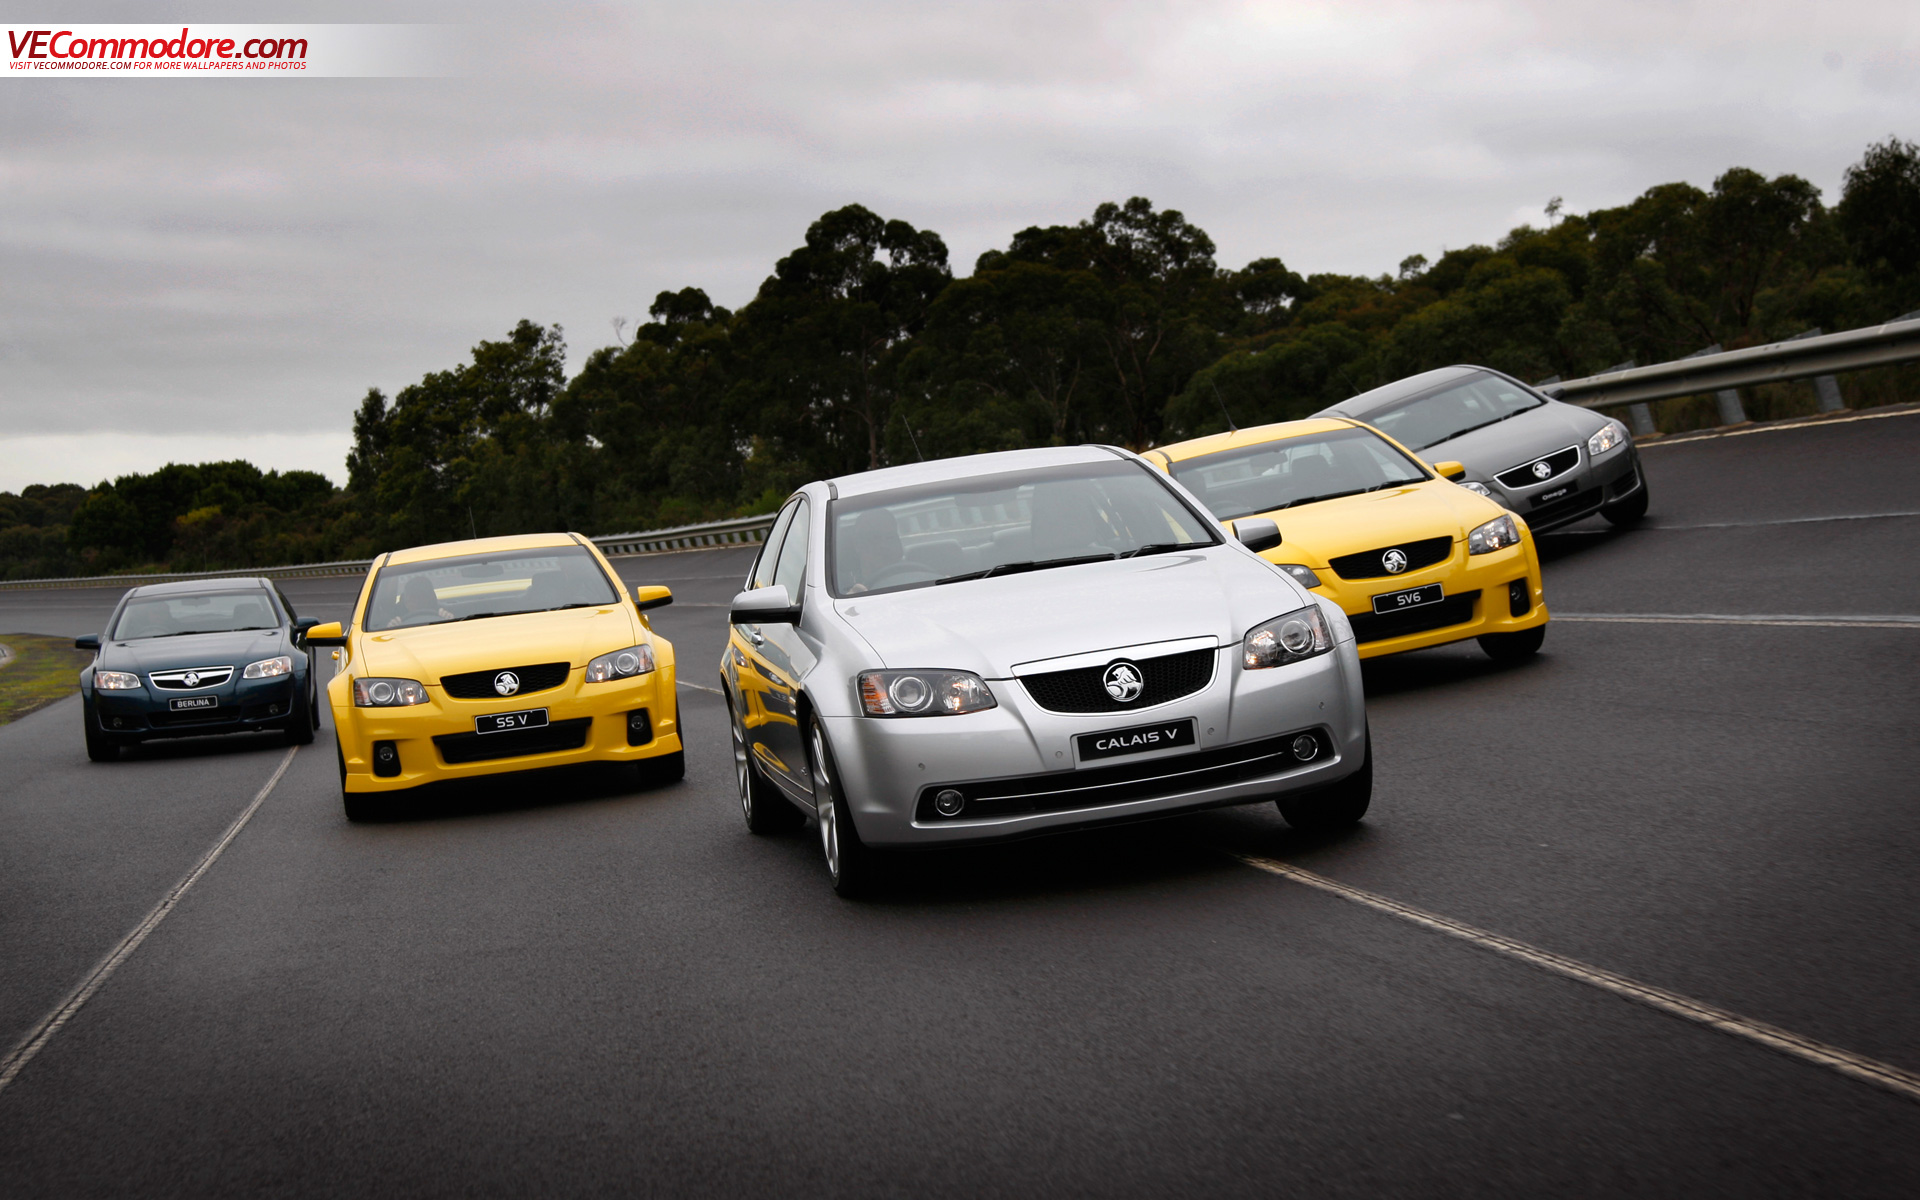 Holden Commodore Cell Phone Wallpapers